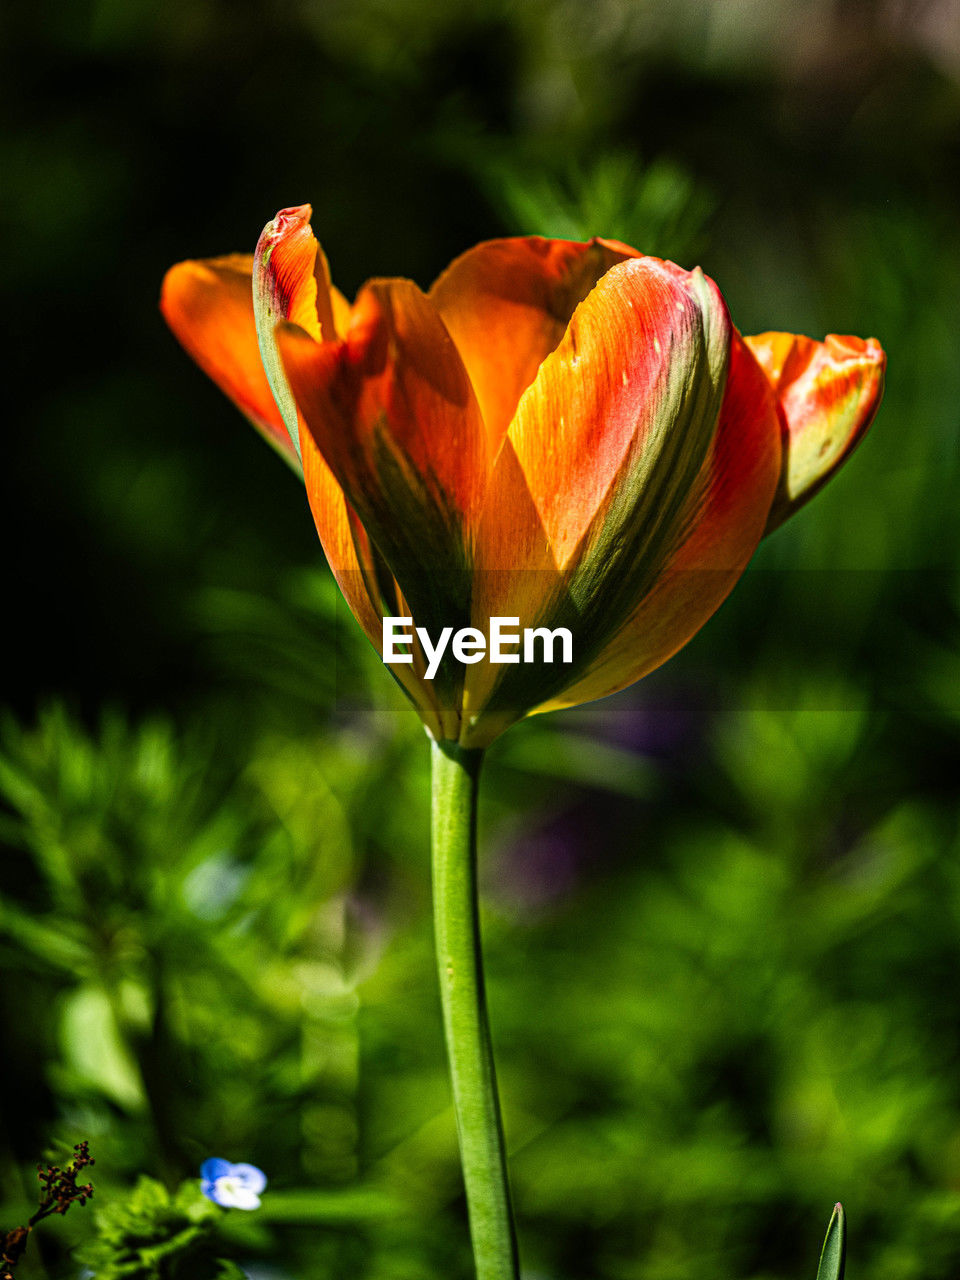 plant, flower, flowering plant, beauty in nature, freshness, close-up, nature, yellow, fragility, petal, flower head, growth, inflorescence, no people, plant stem, macro photography, focus on foreground, outdoors, springtime, green, botany, plant part, leaf, orange color, tulip, blossom, day